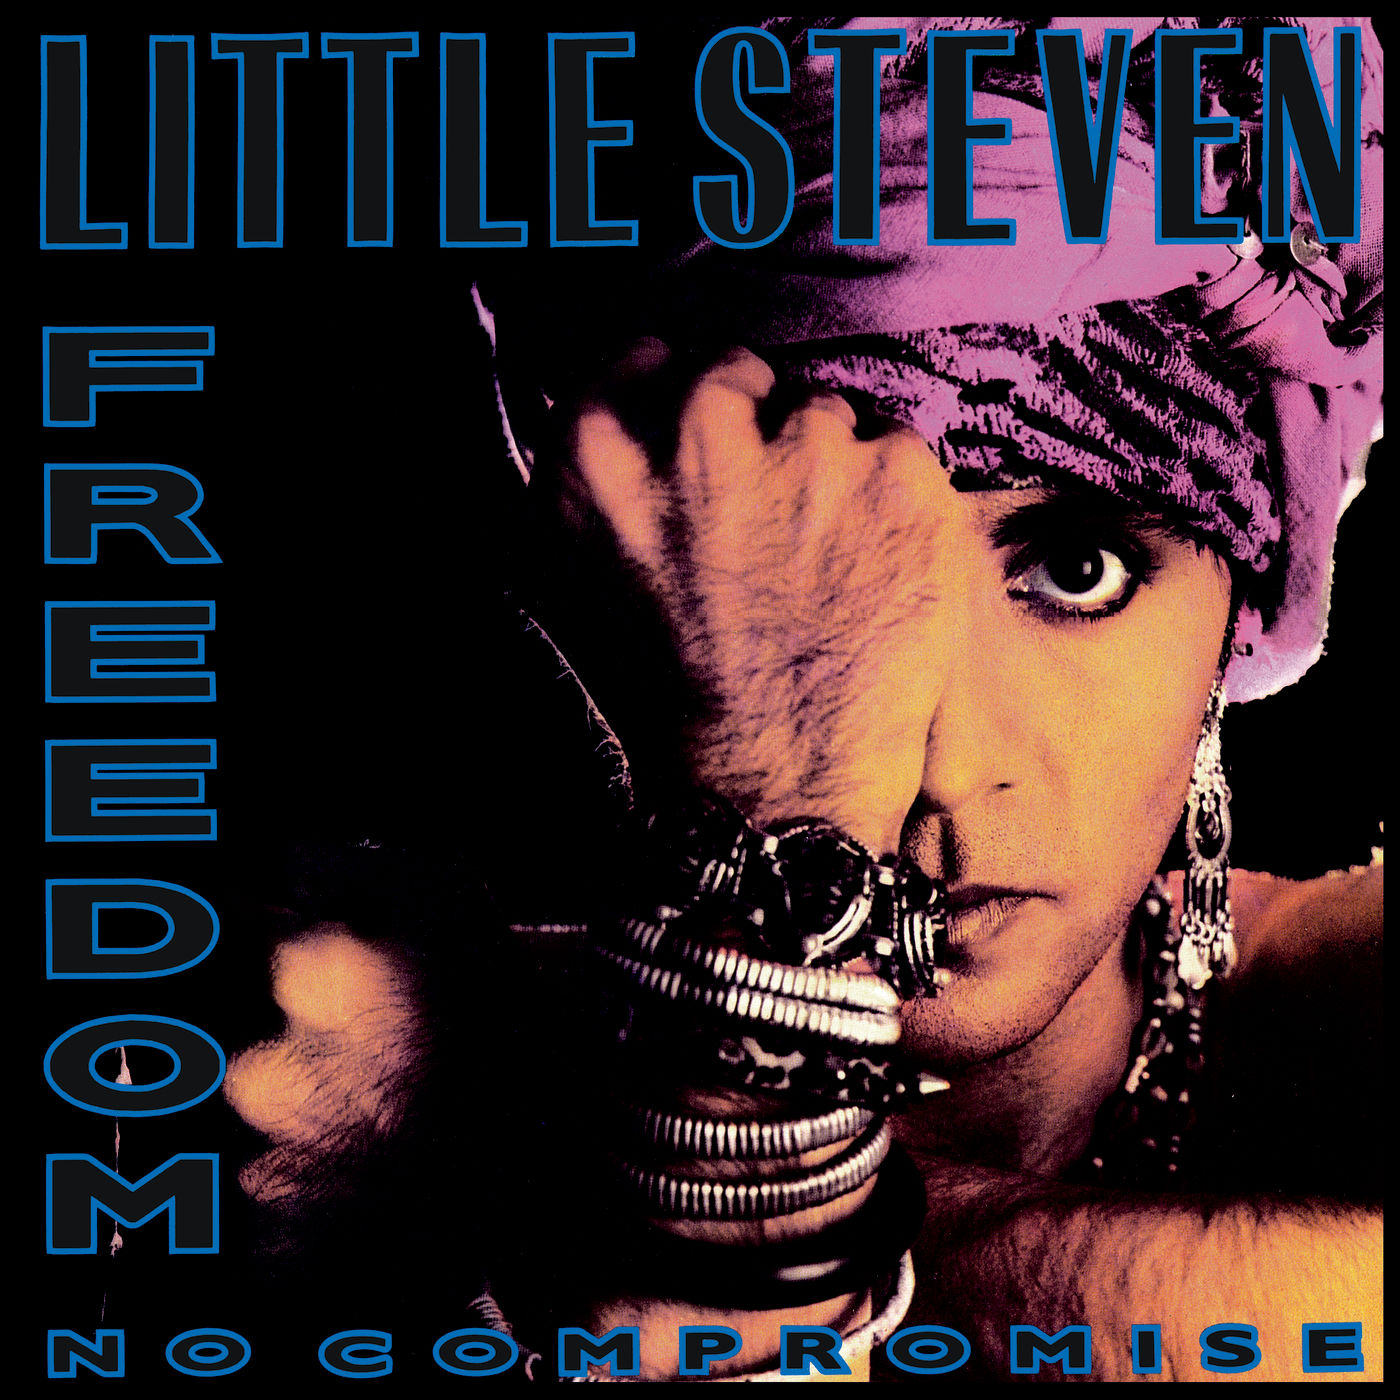 Little Steven - Freedom - No Compromise (Deluxe Edition) (1987/2019) [FLAC 24bit/96kHz]